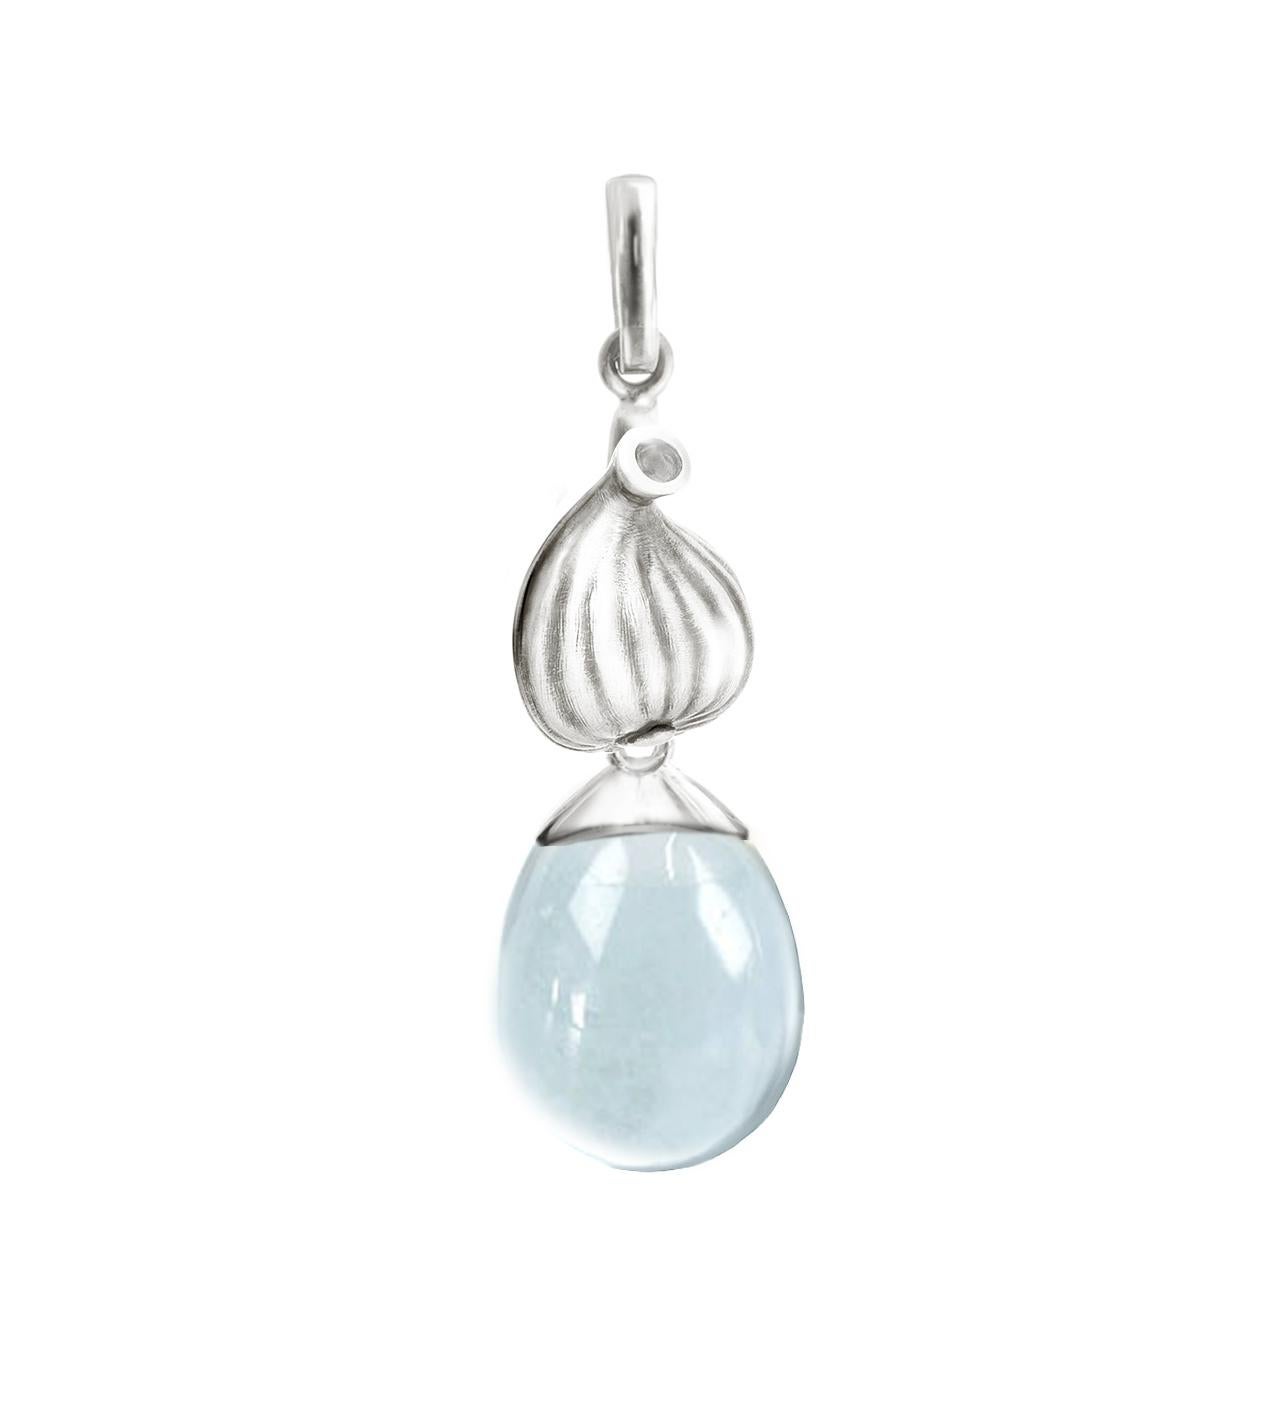 Sterling Silver Drop Pendant Necklace with Blue Topaz by the Artist For Sale